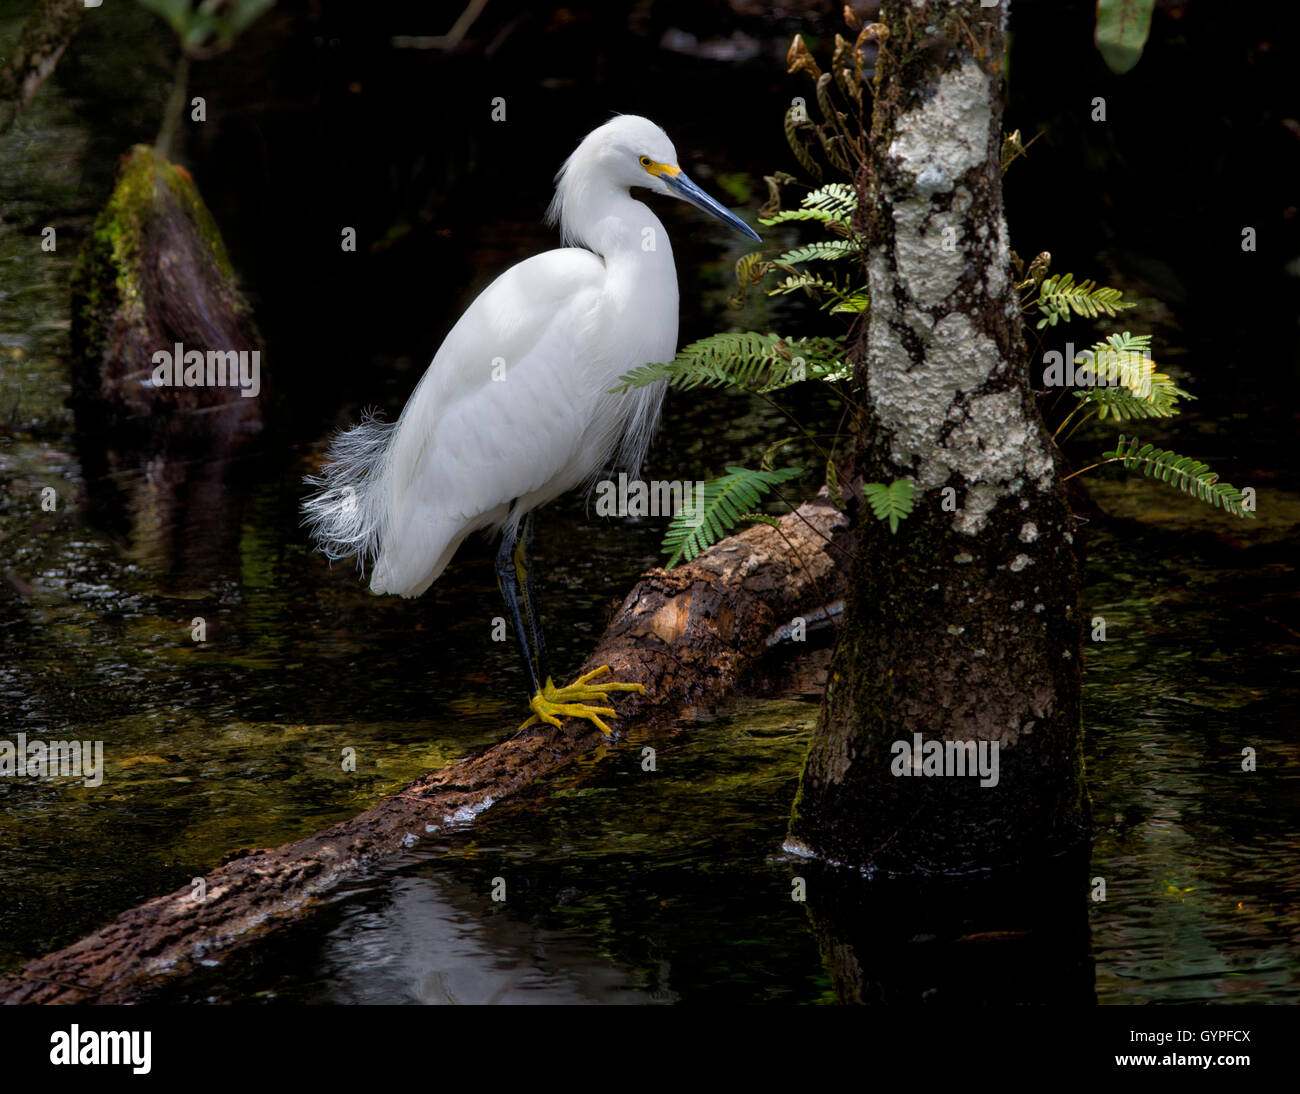 A Snowy Egret caught in light filtering through the canopy of Florida's Big Cypress Swamp stands elegantly on a fallen limb. Stock Photo